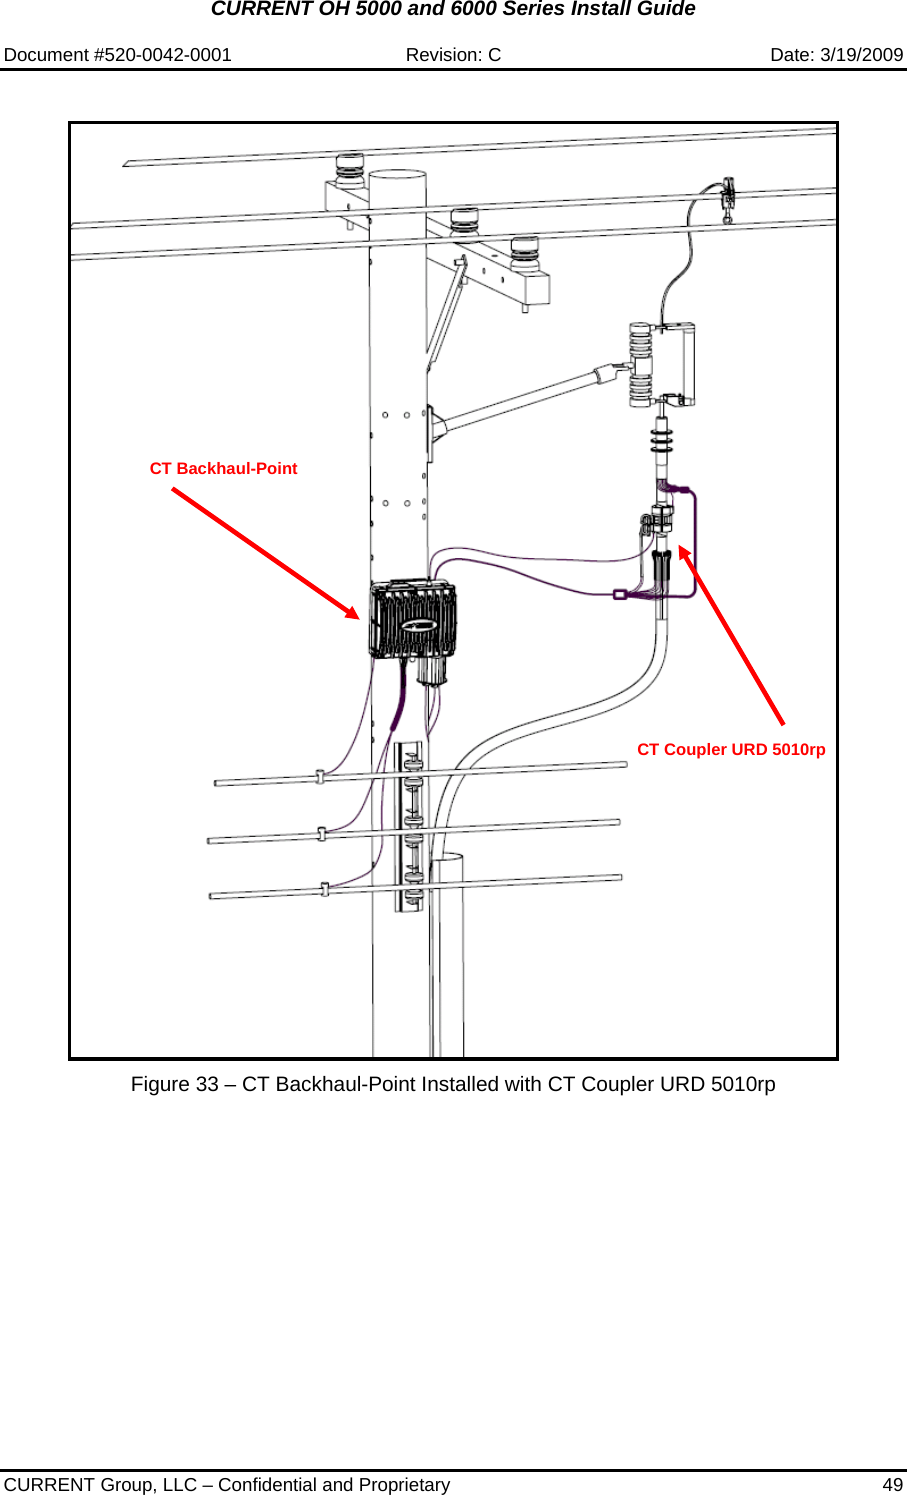 CURRENT OH 5000 and 6000 Series Install Guide  Document #520-0042-0001  Revision: C  Date: 3/19/2009  CURRENT Group, LLC – Confidential and Proprietary  49    Figure 33 – CT Backhaul-Point Installed with CT Coupler URD 5010rp  CT Backhaul-Point CT Coupler URD 5010rp 